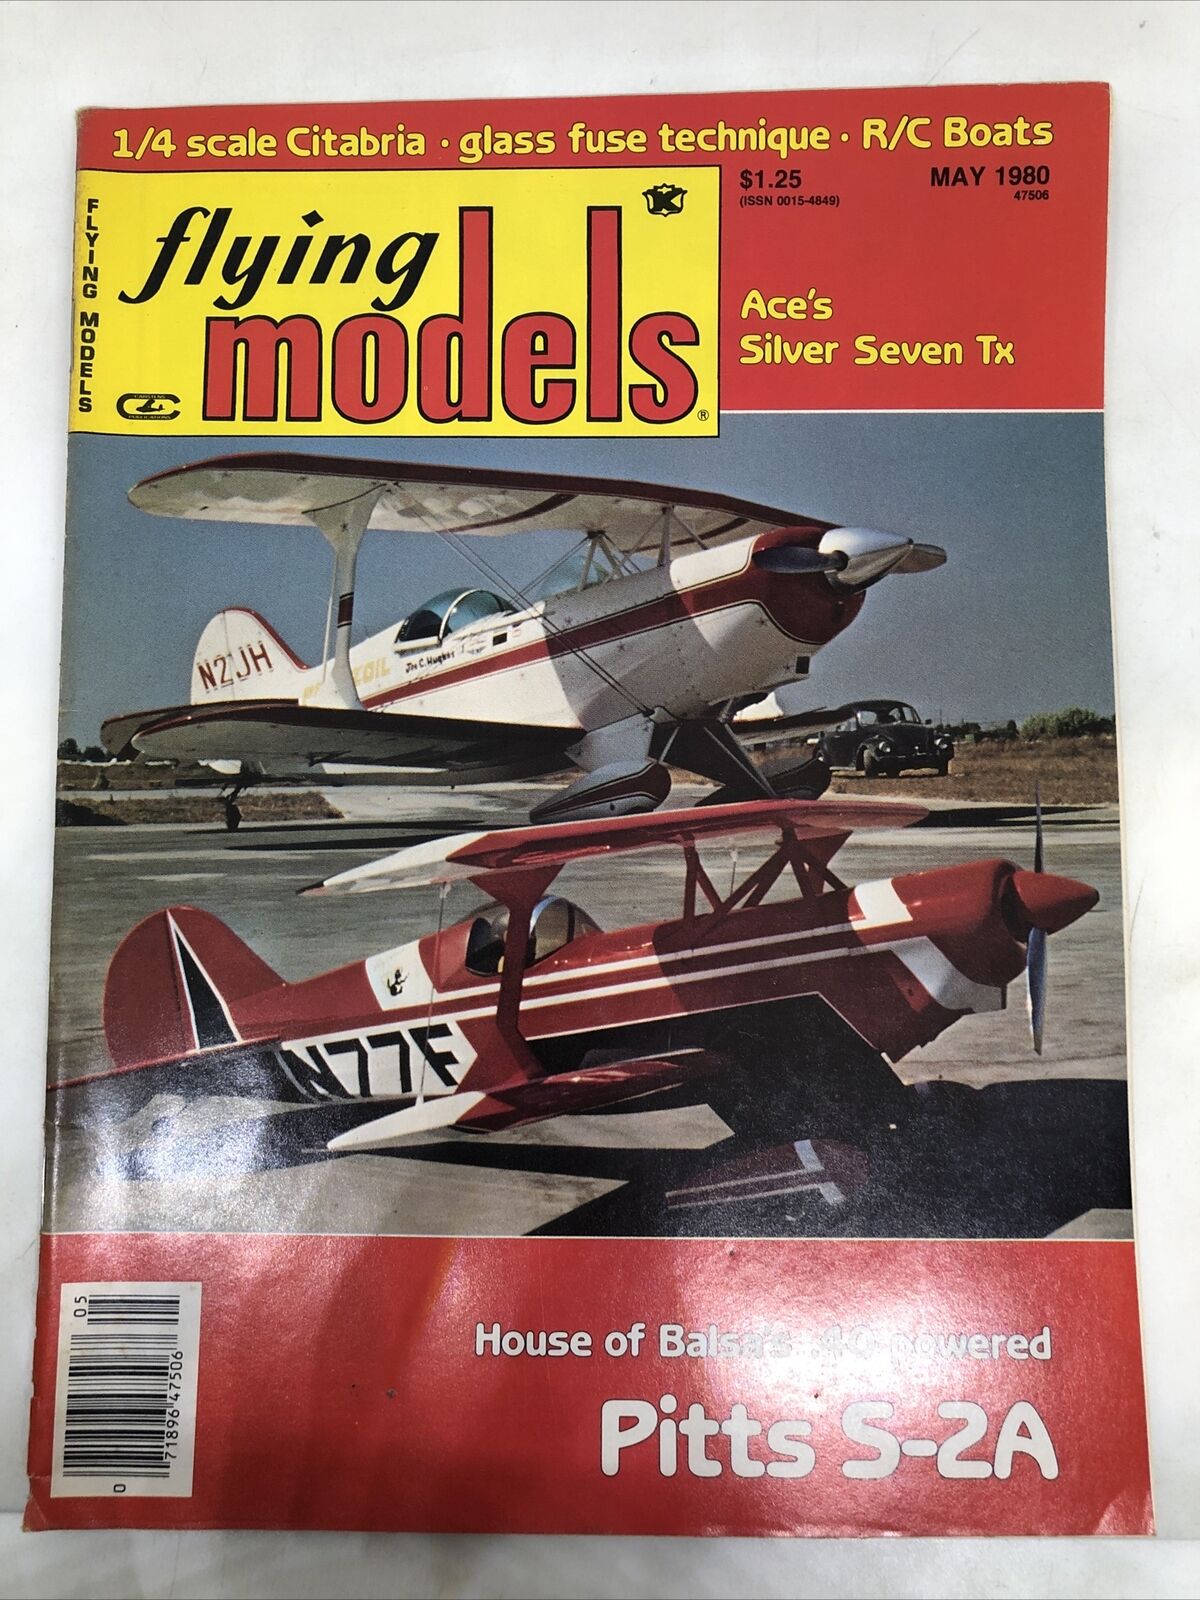 Vintage Flying Models Magazine May 1980 House OF Balsa .40 Pitts S-2a m305